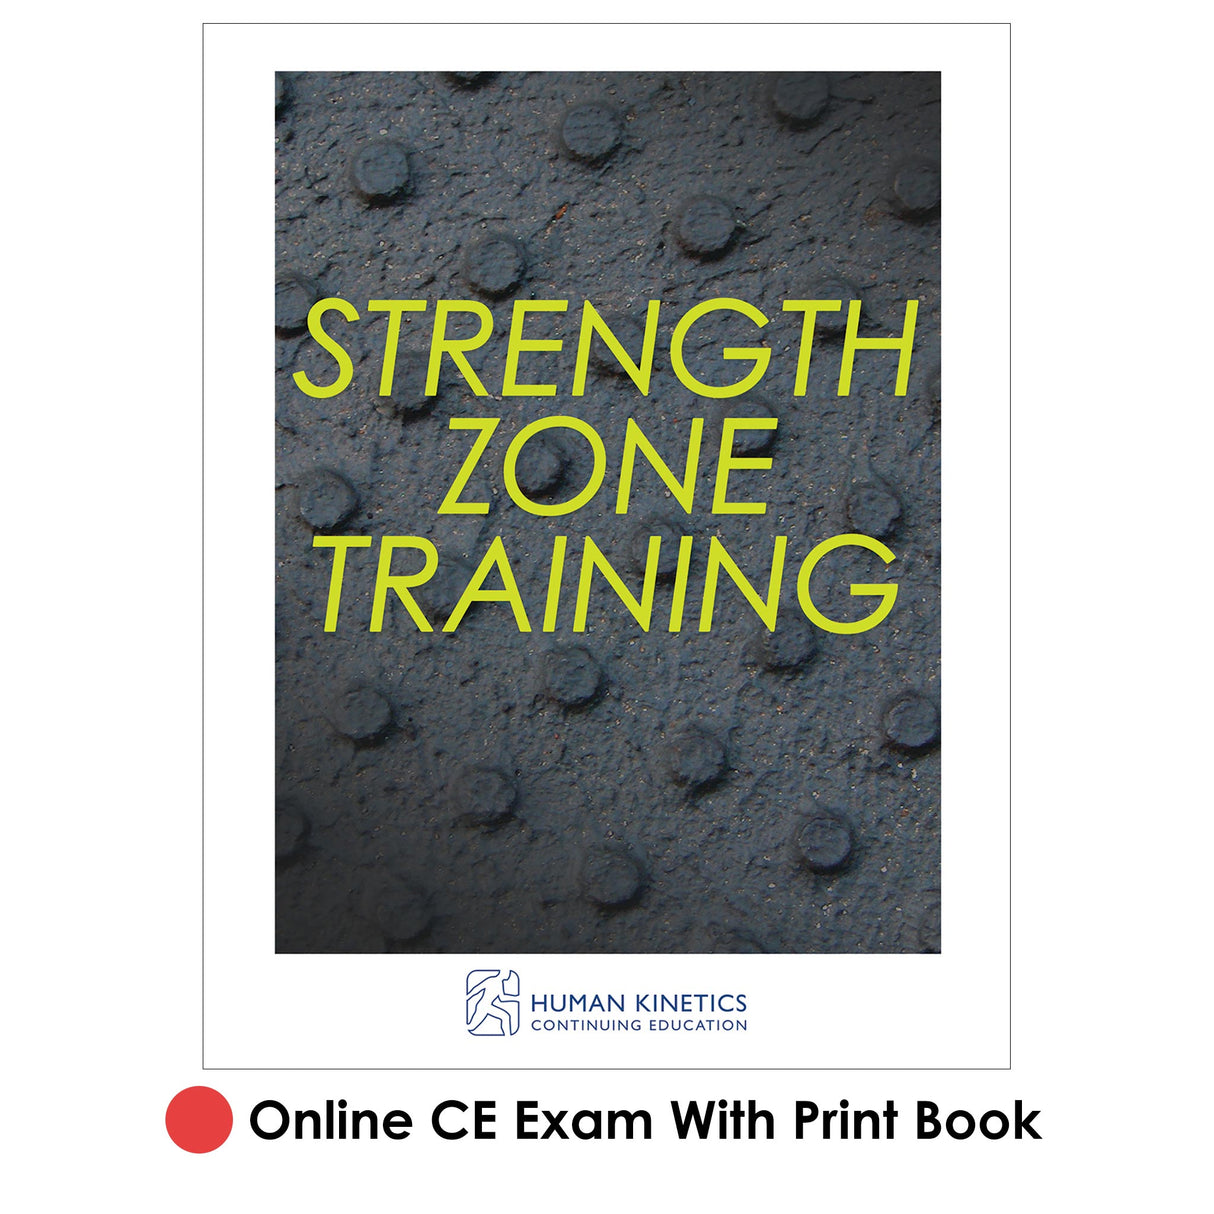 Strength Zone Training Online CE Exam With Print Book